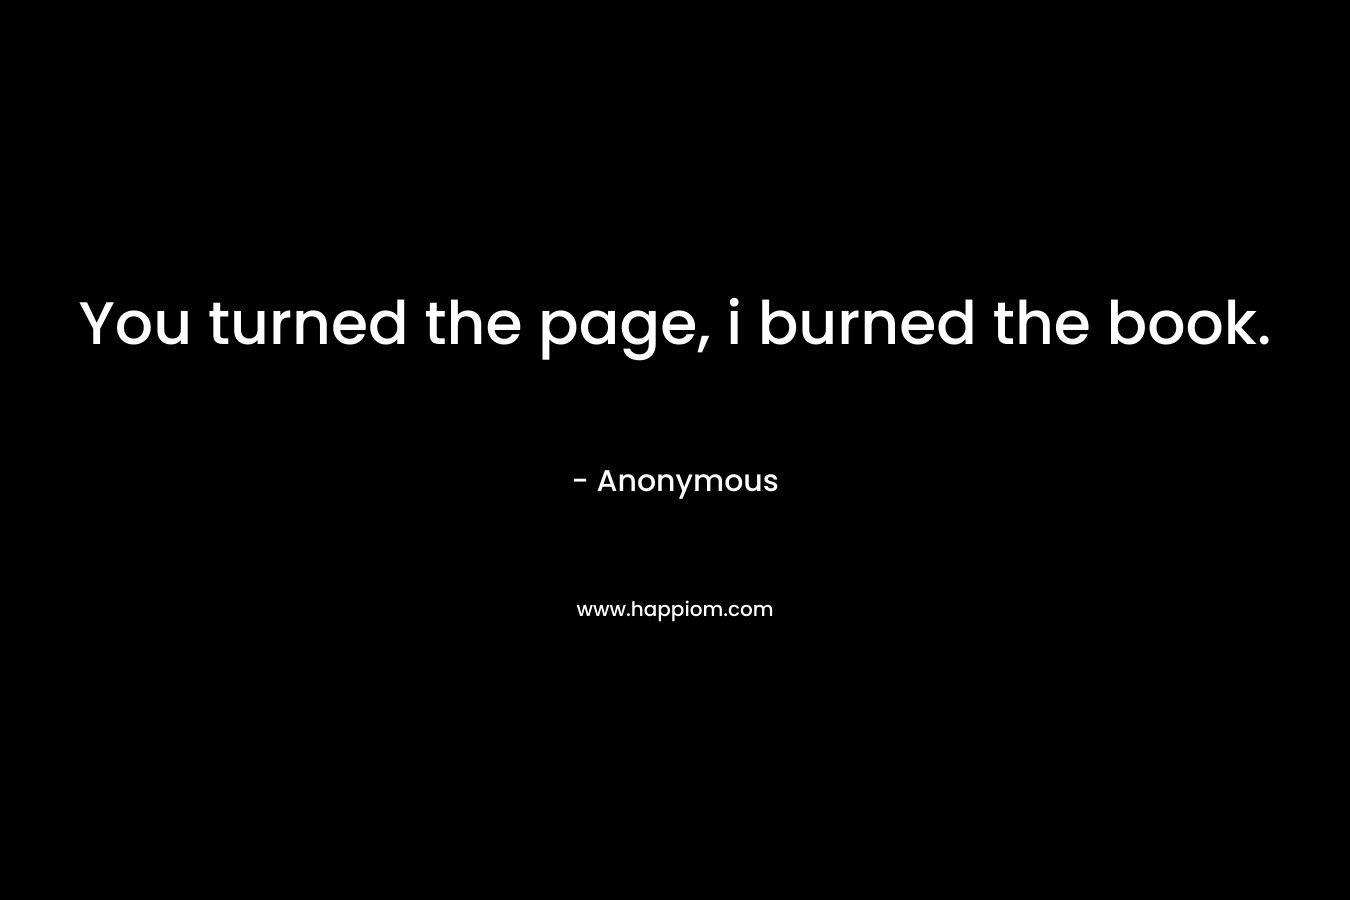 You turned the page, i burned the book. – Anonymous